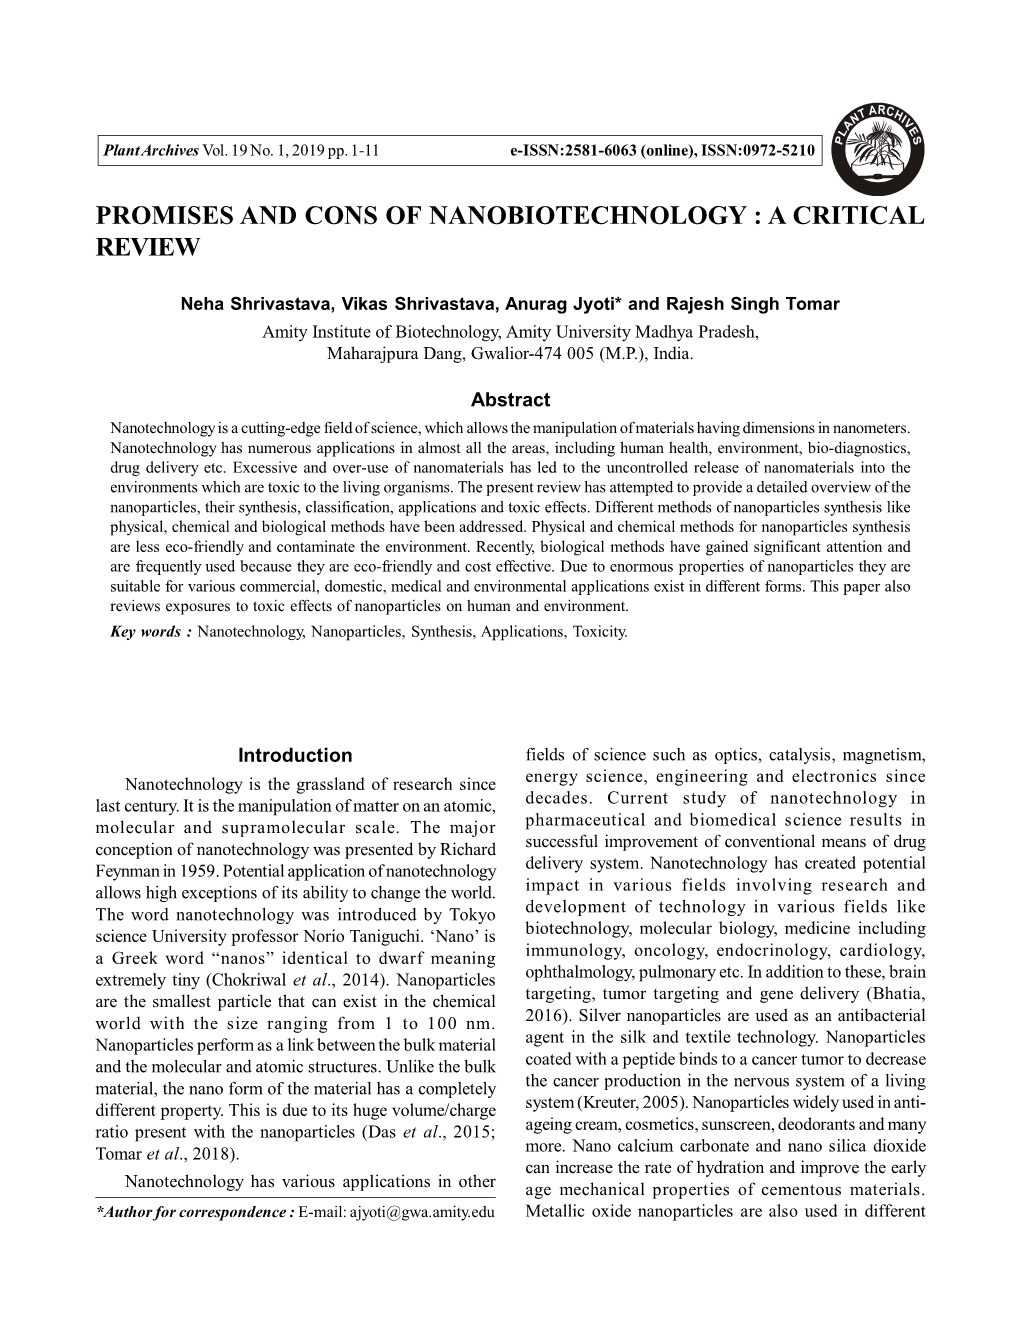 Promises and Cons of Nanobiotechnology : a Critical Review